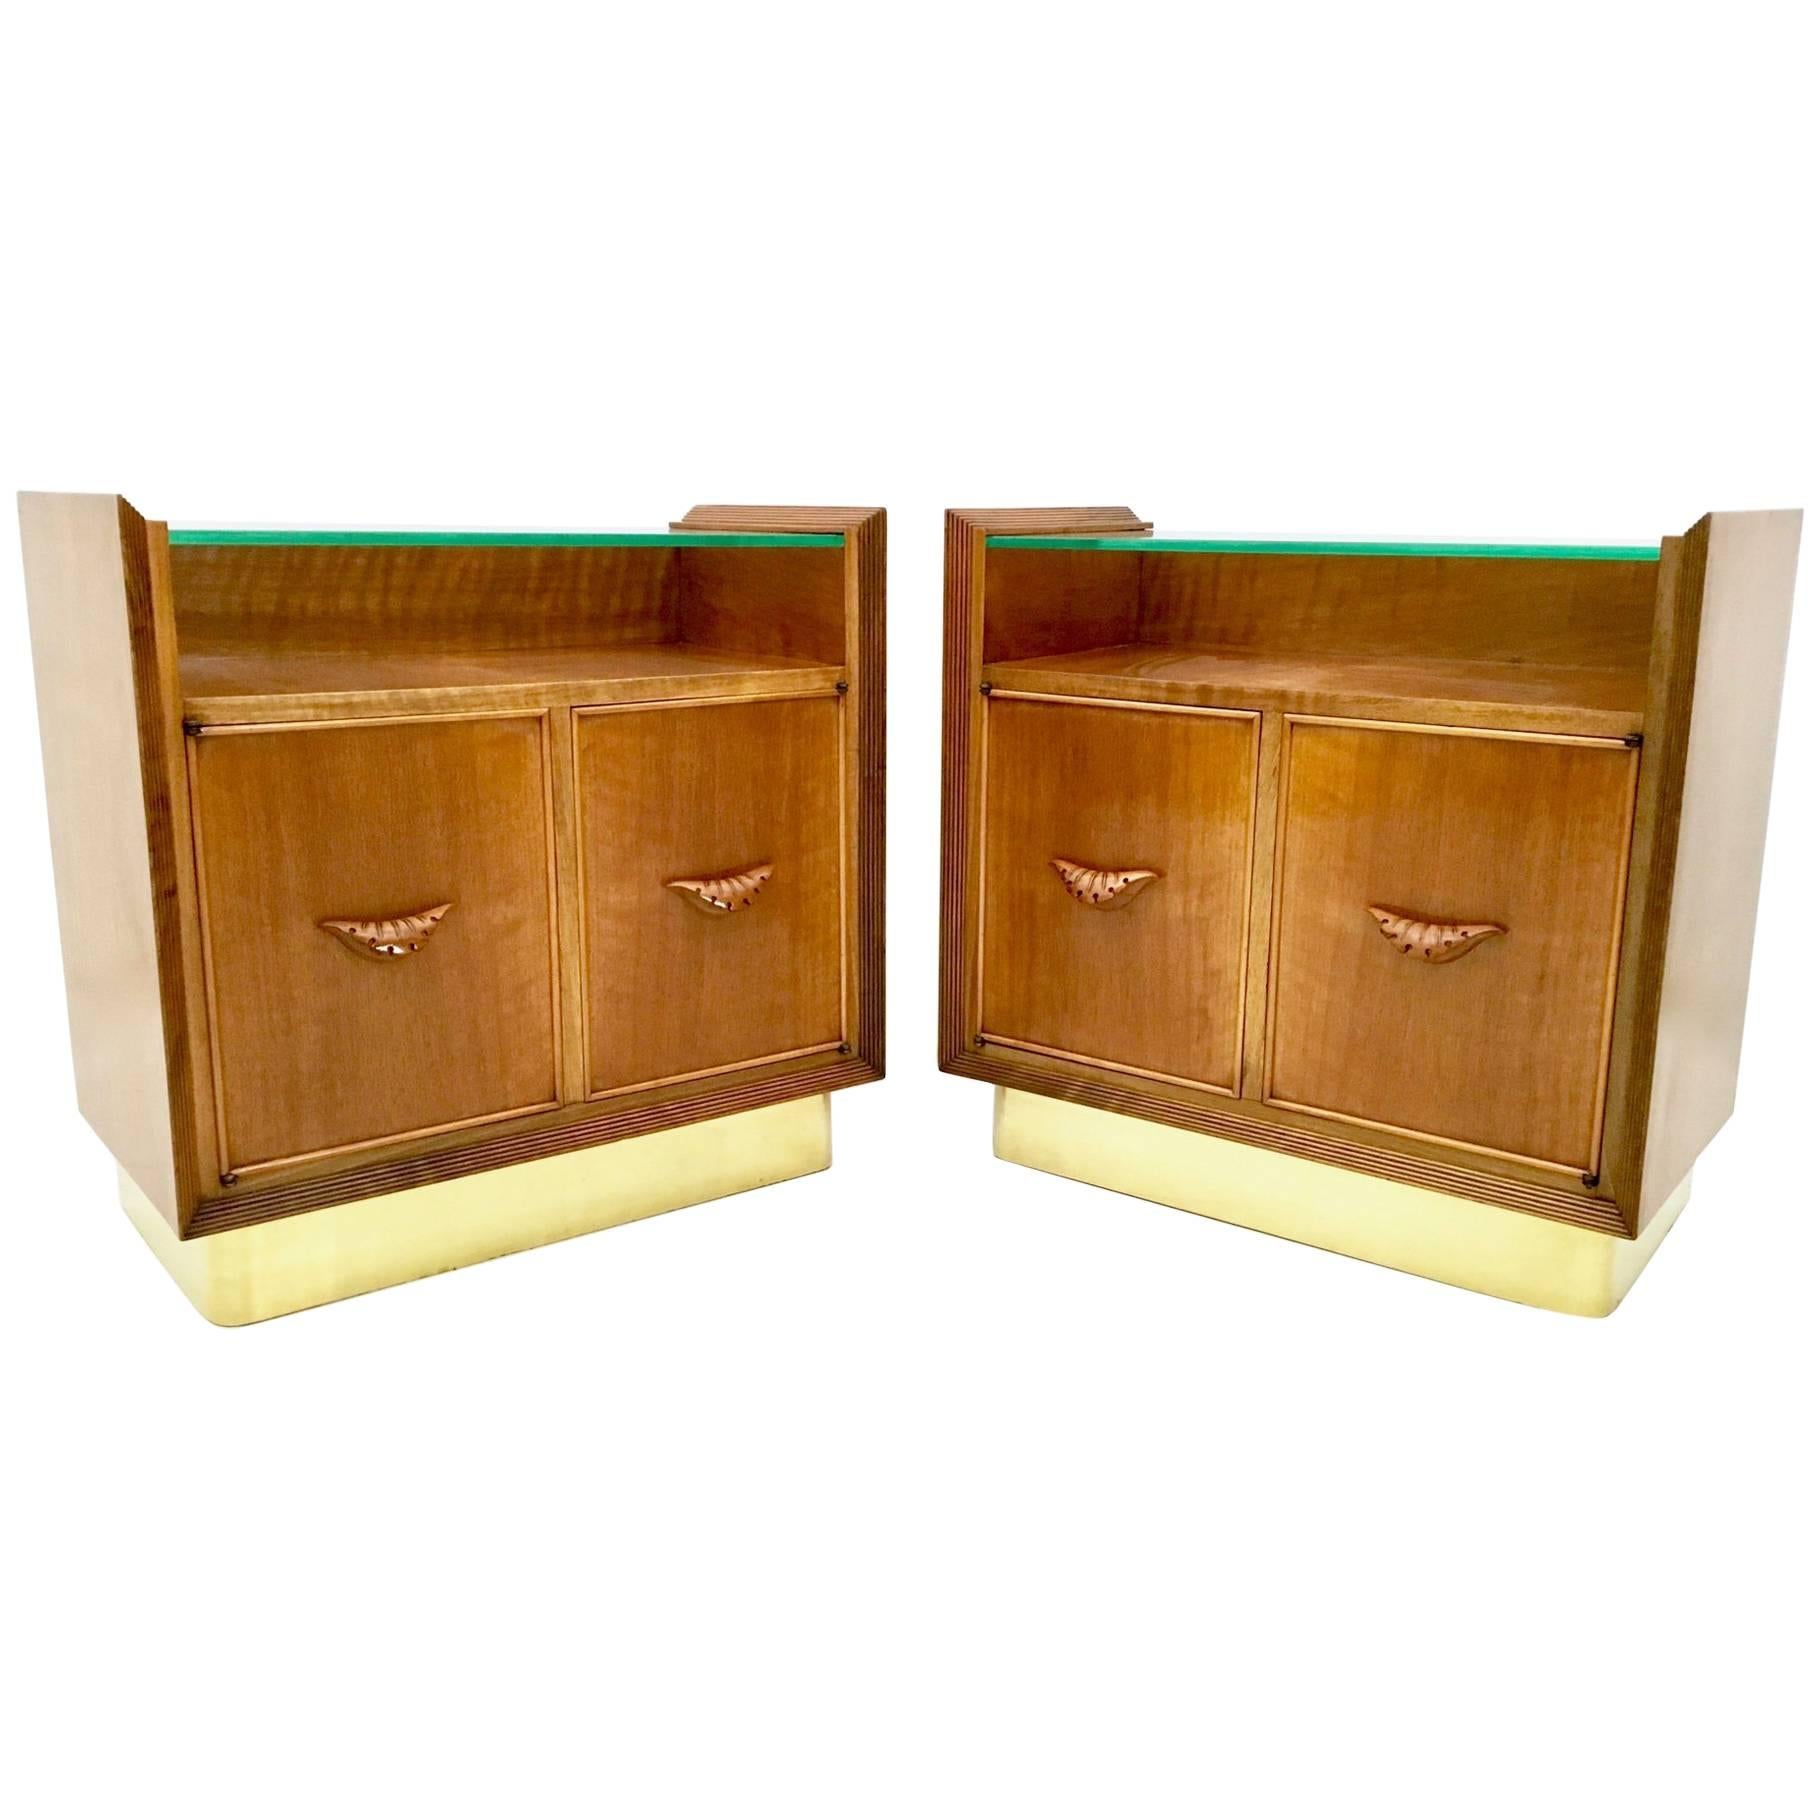 Pair of Walnut Nightstands Ascribable to Borsani with a Crystal Top Italy, 1940s